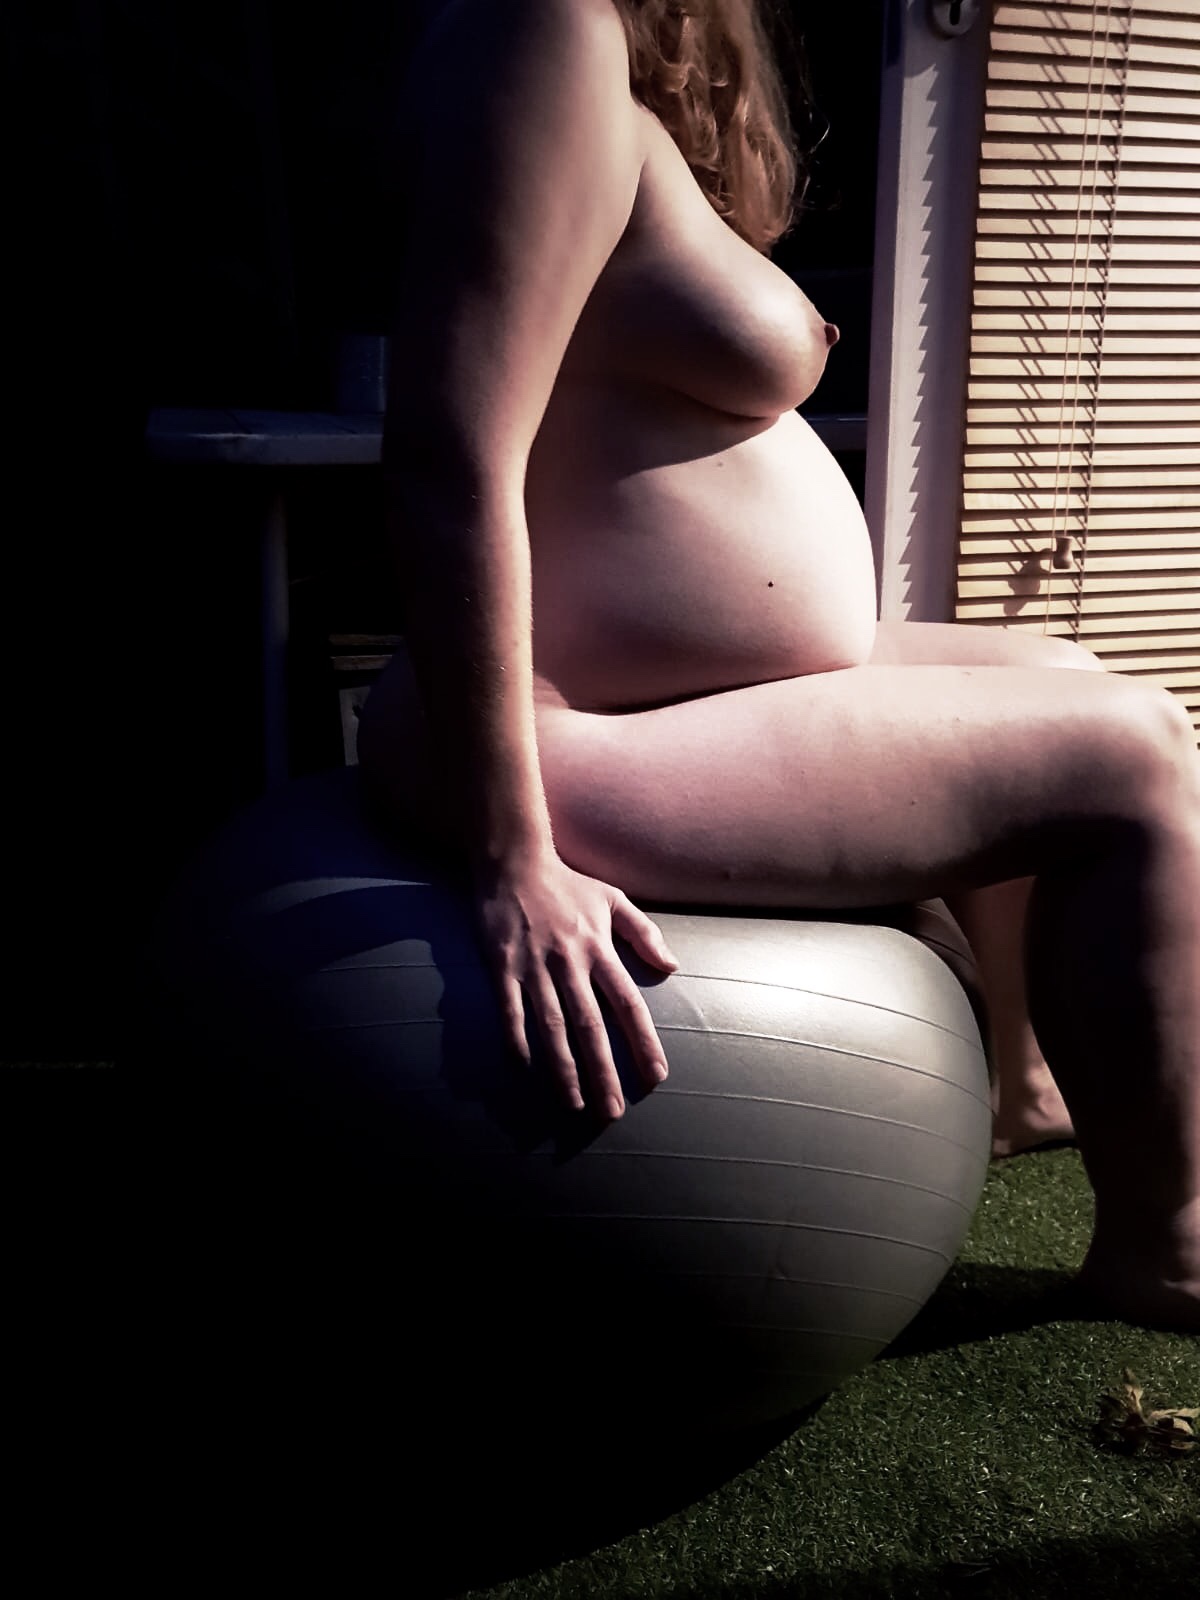 My 34 week pregnant self still naked on the grey exercise ball, this time in profile and facing towards the light to emphasise my growing bump